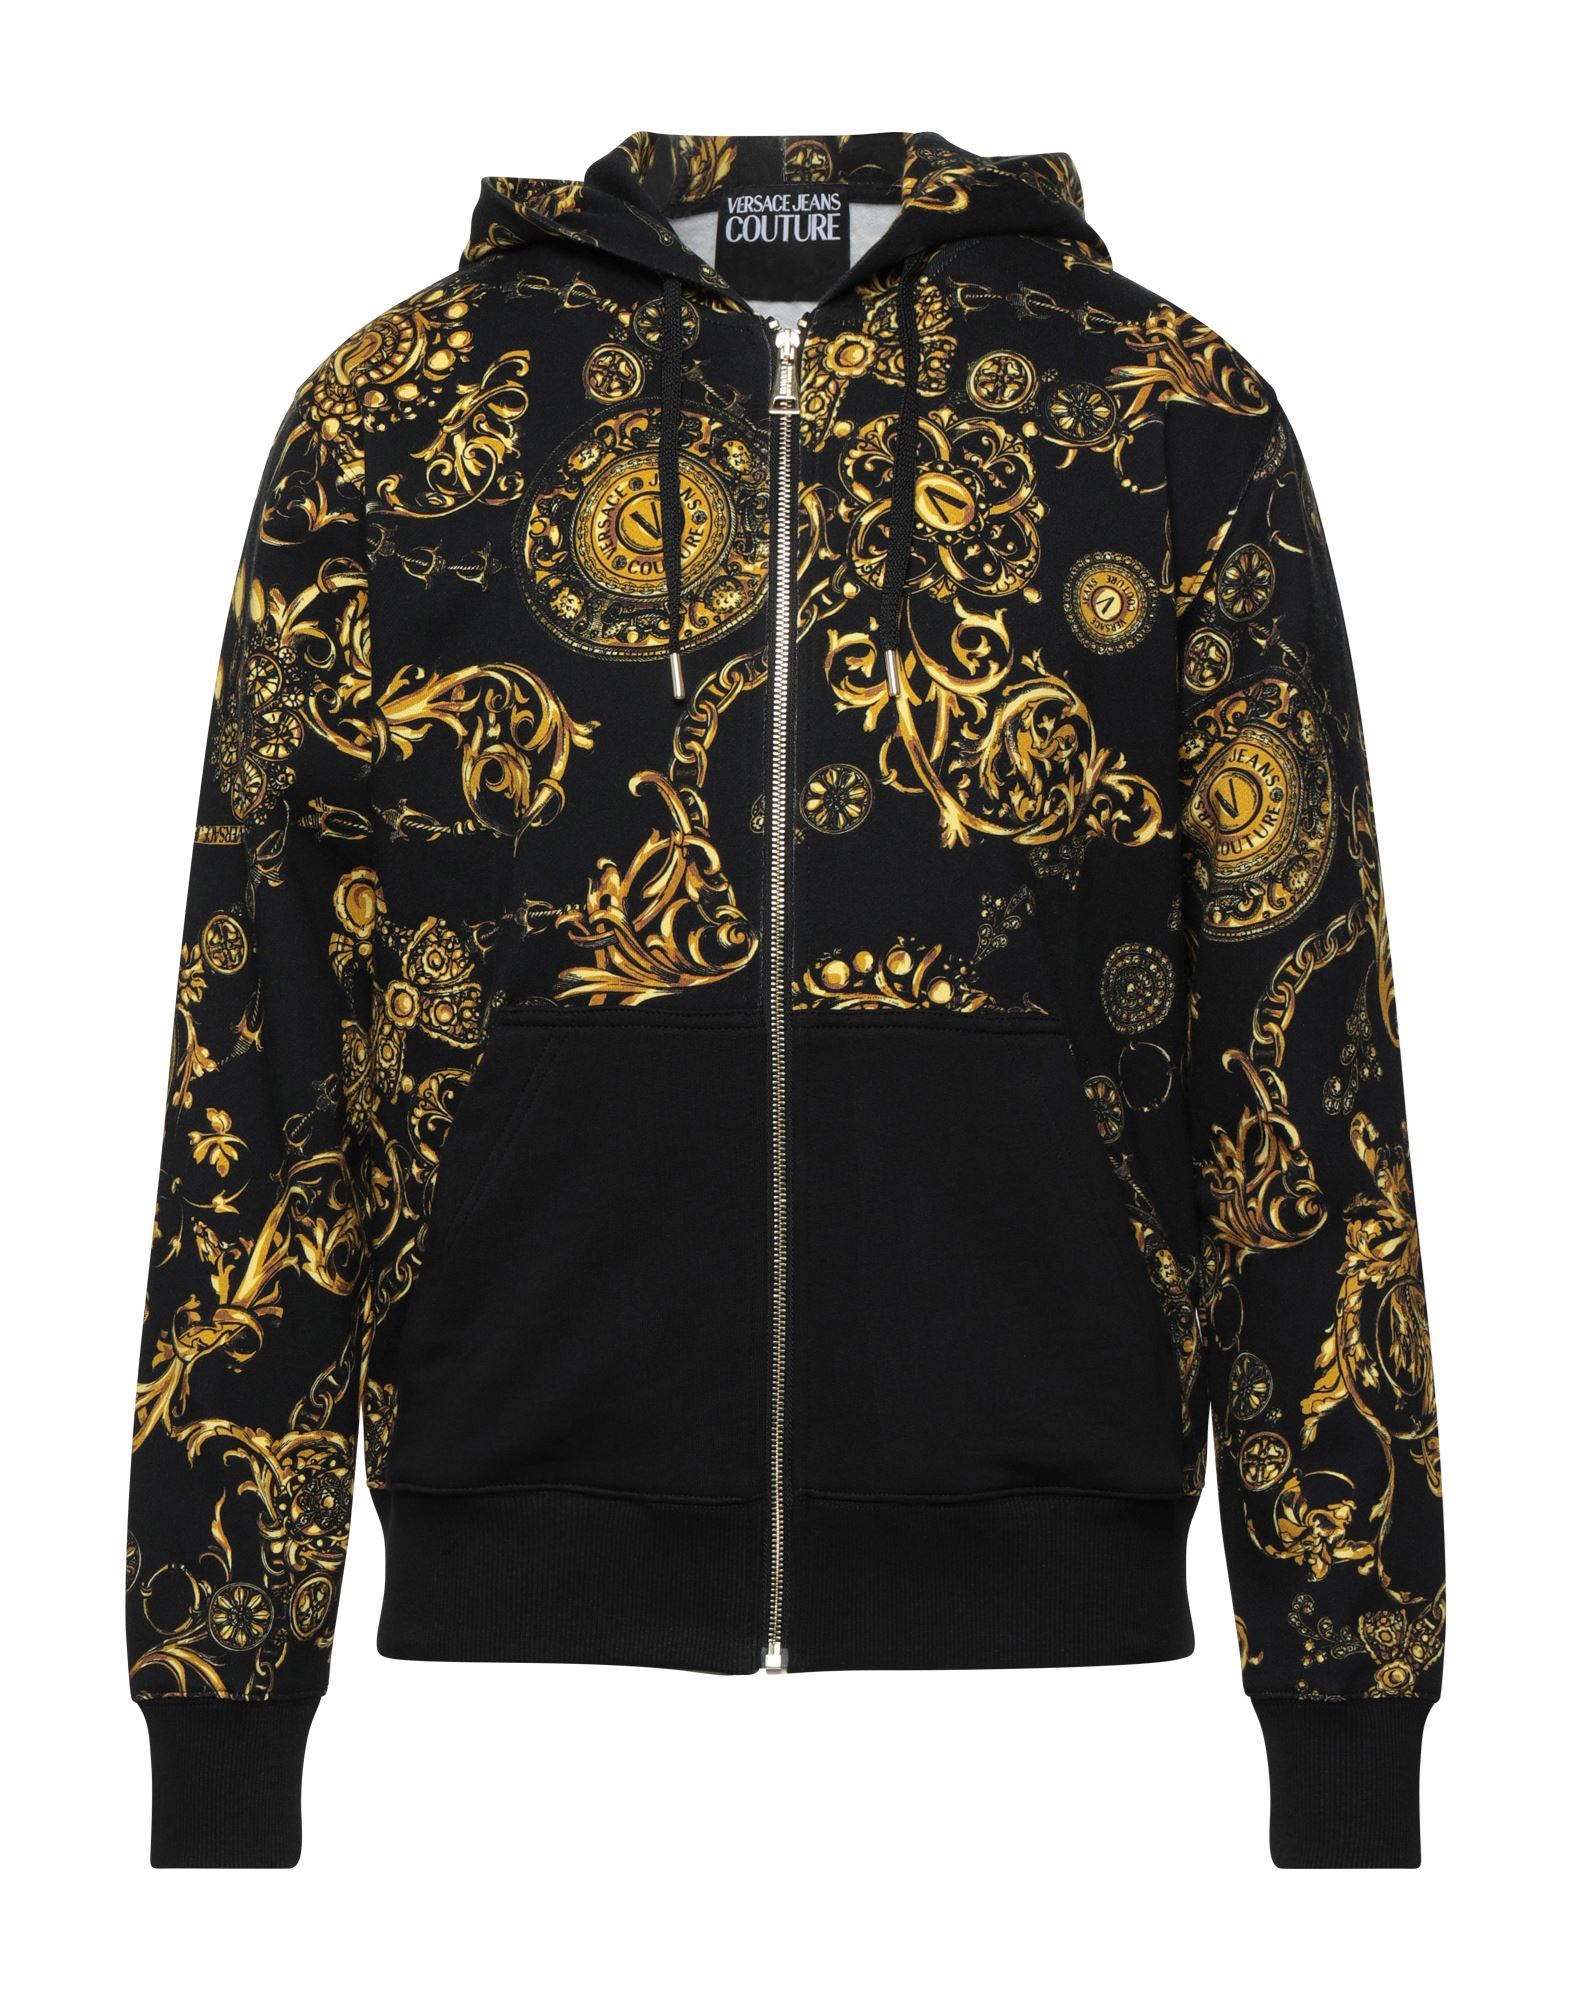 Versace Jeans Couture Sweatshirts In Black